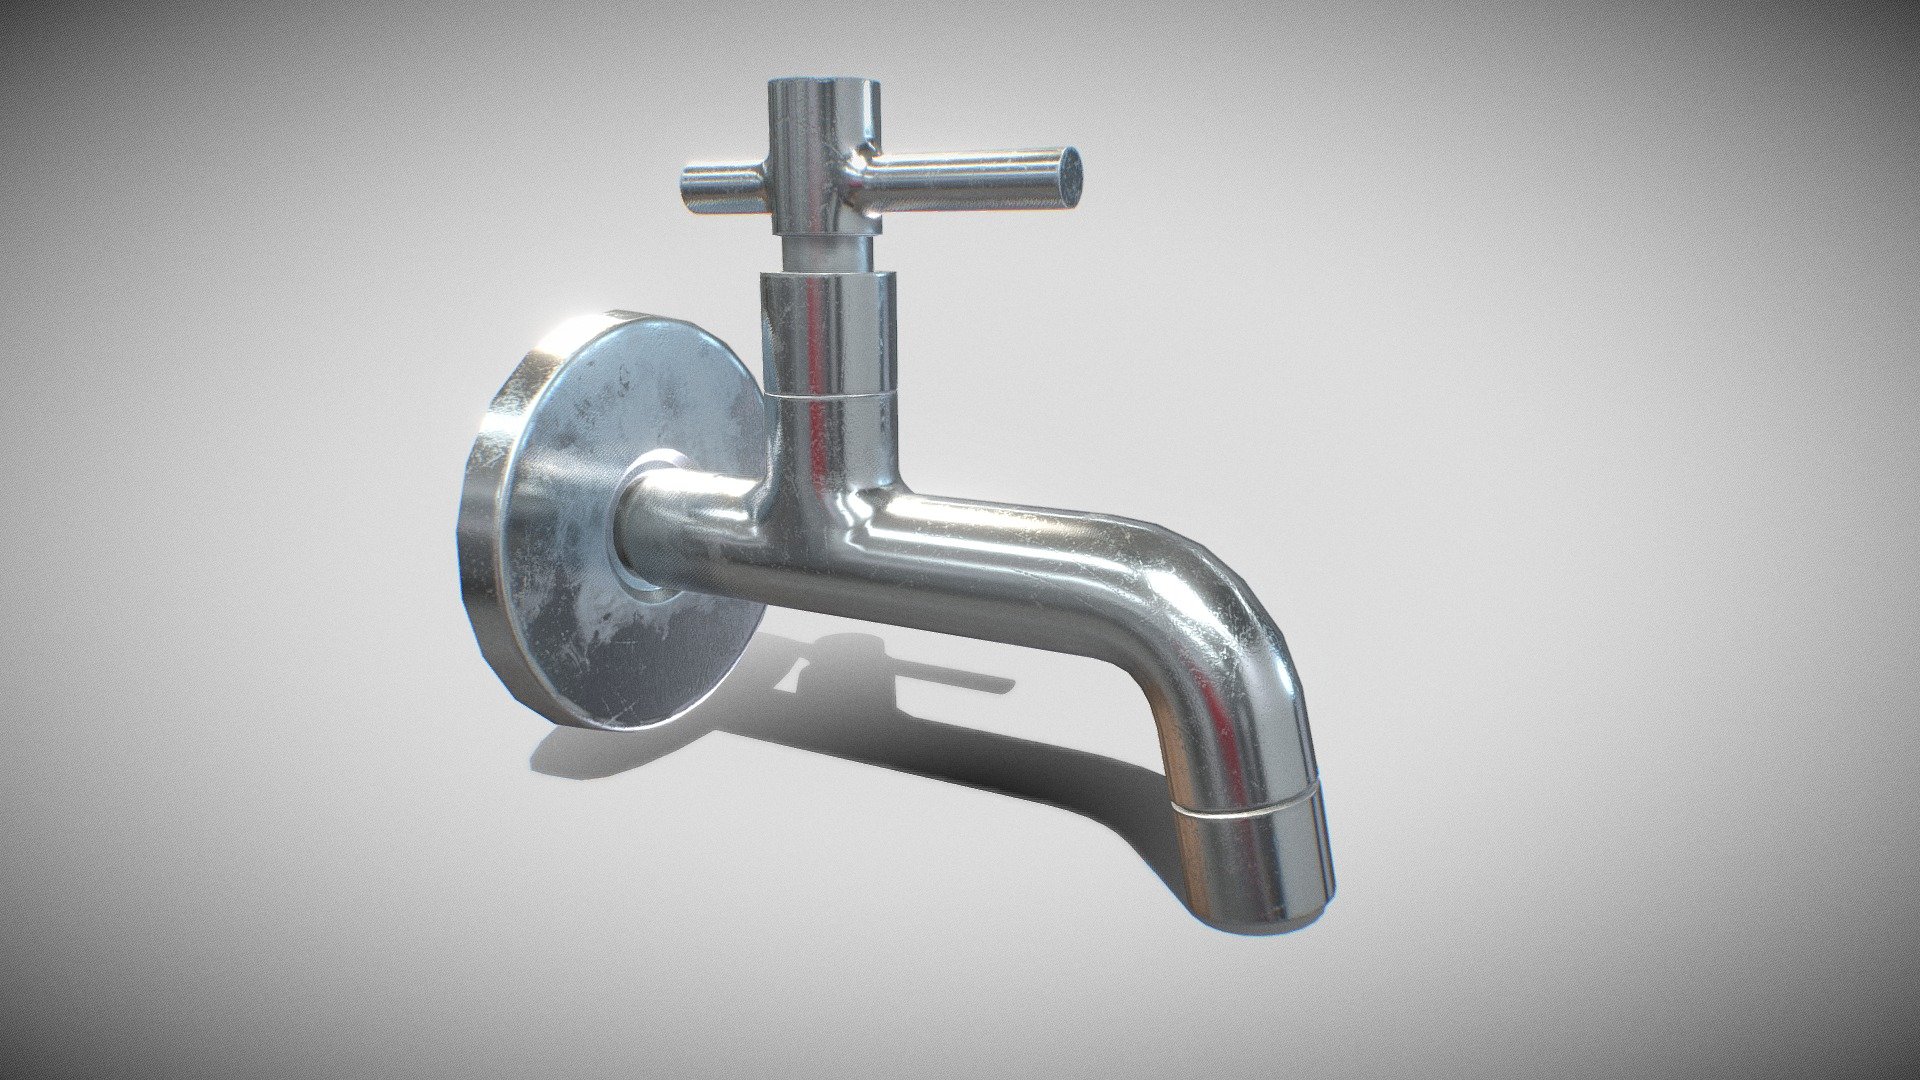 Tap Quick-Silver 3d model ready for VirtualReality(VR),Augmented Reality(AR),games and other render engines.This lowpoly 3d model is baked with 4k resolution textures.The PBR_Maps includes- albedo,roughness,metallic and normal 3d model